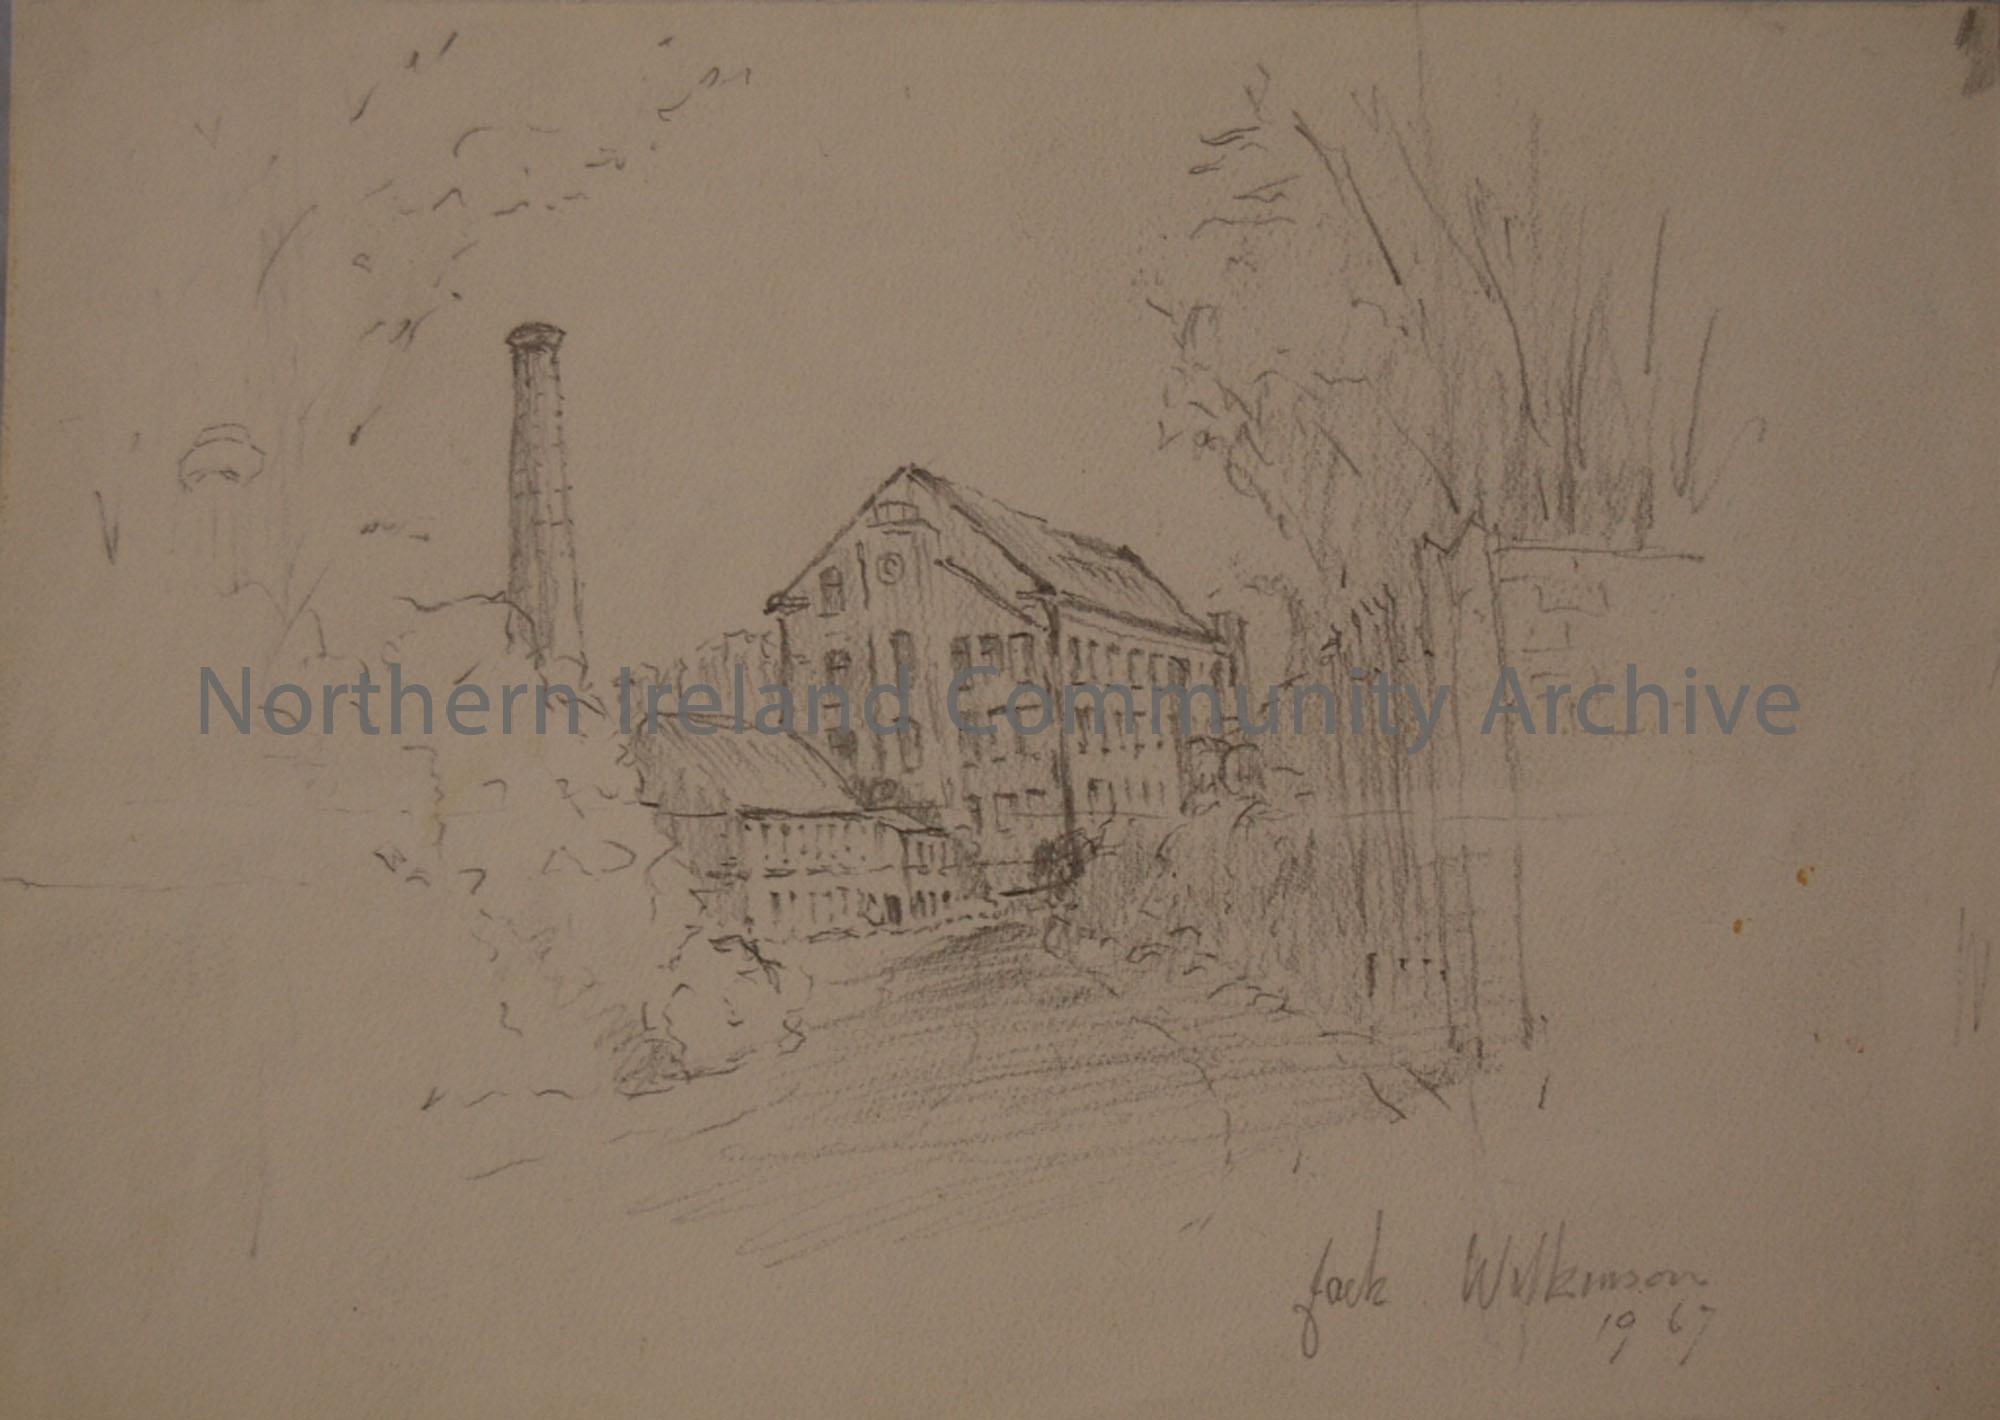 Pencil sketch of Balnamore Mill, Co. Antrim by Jack Wilkinson